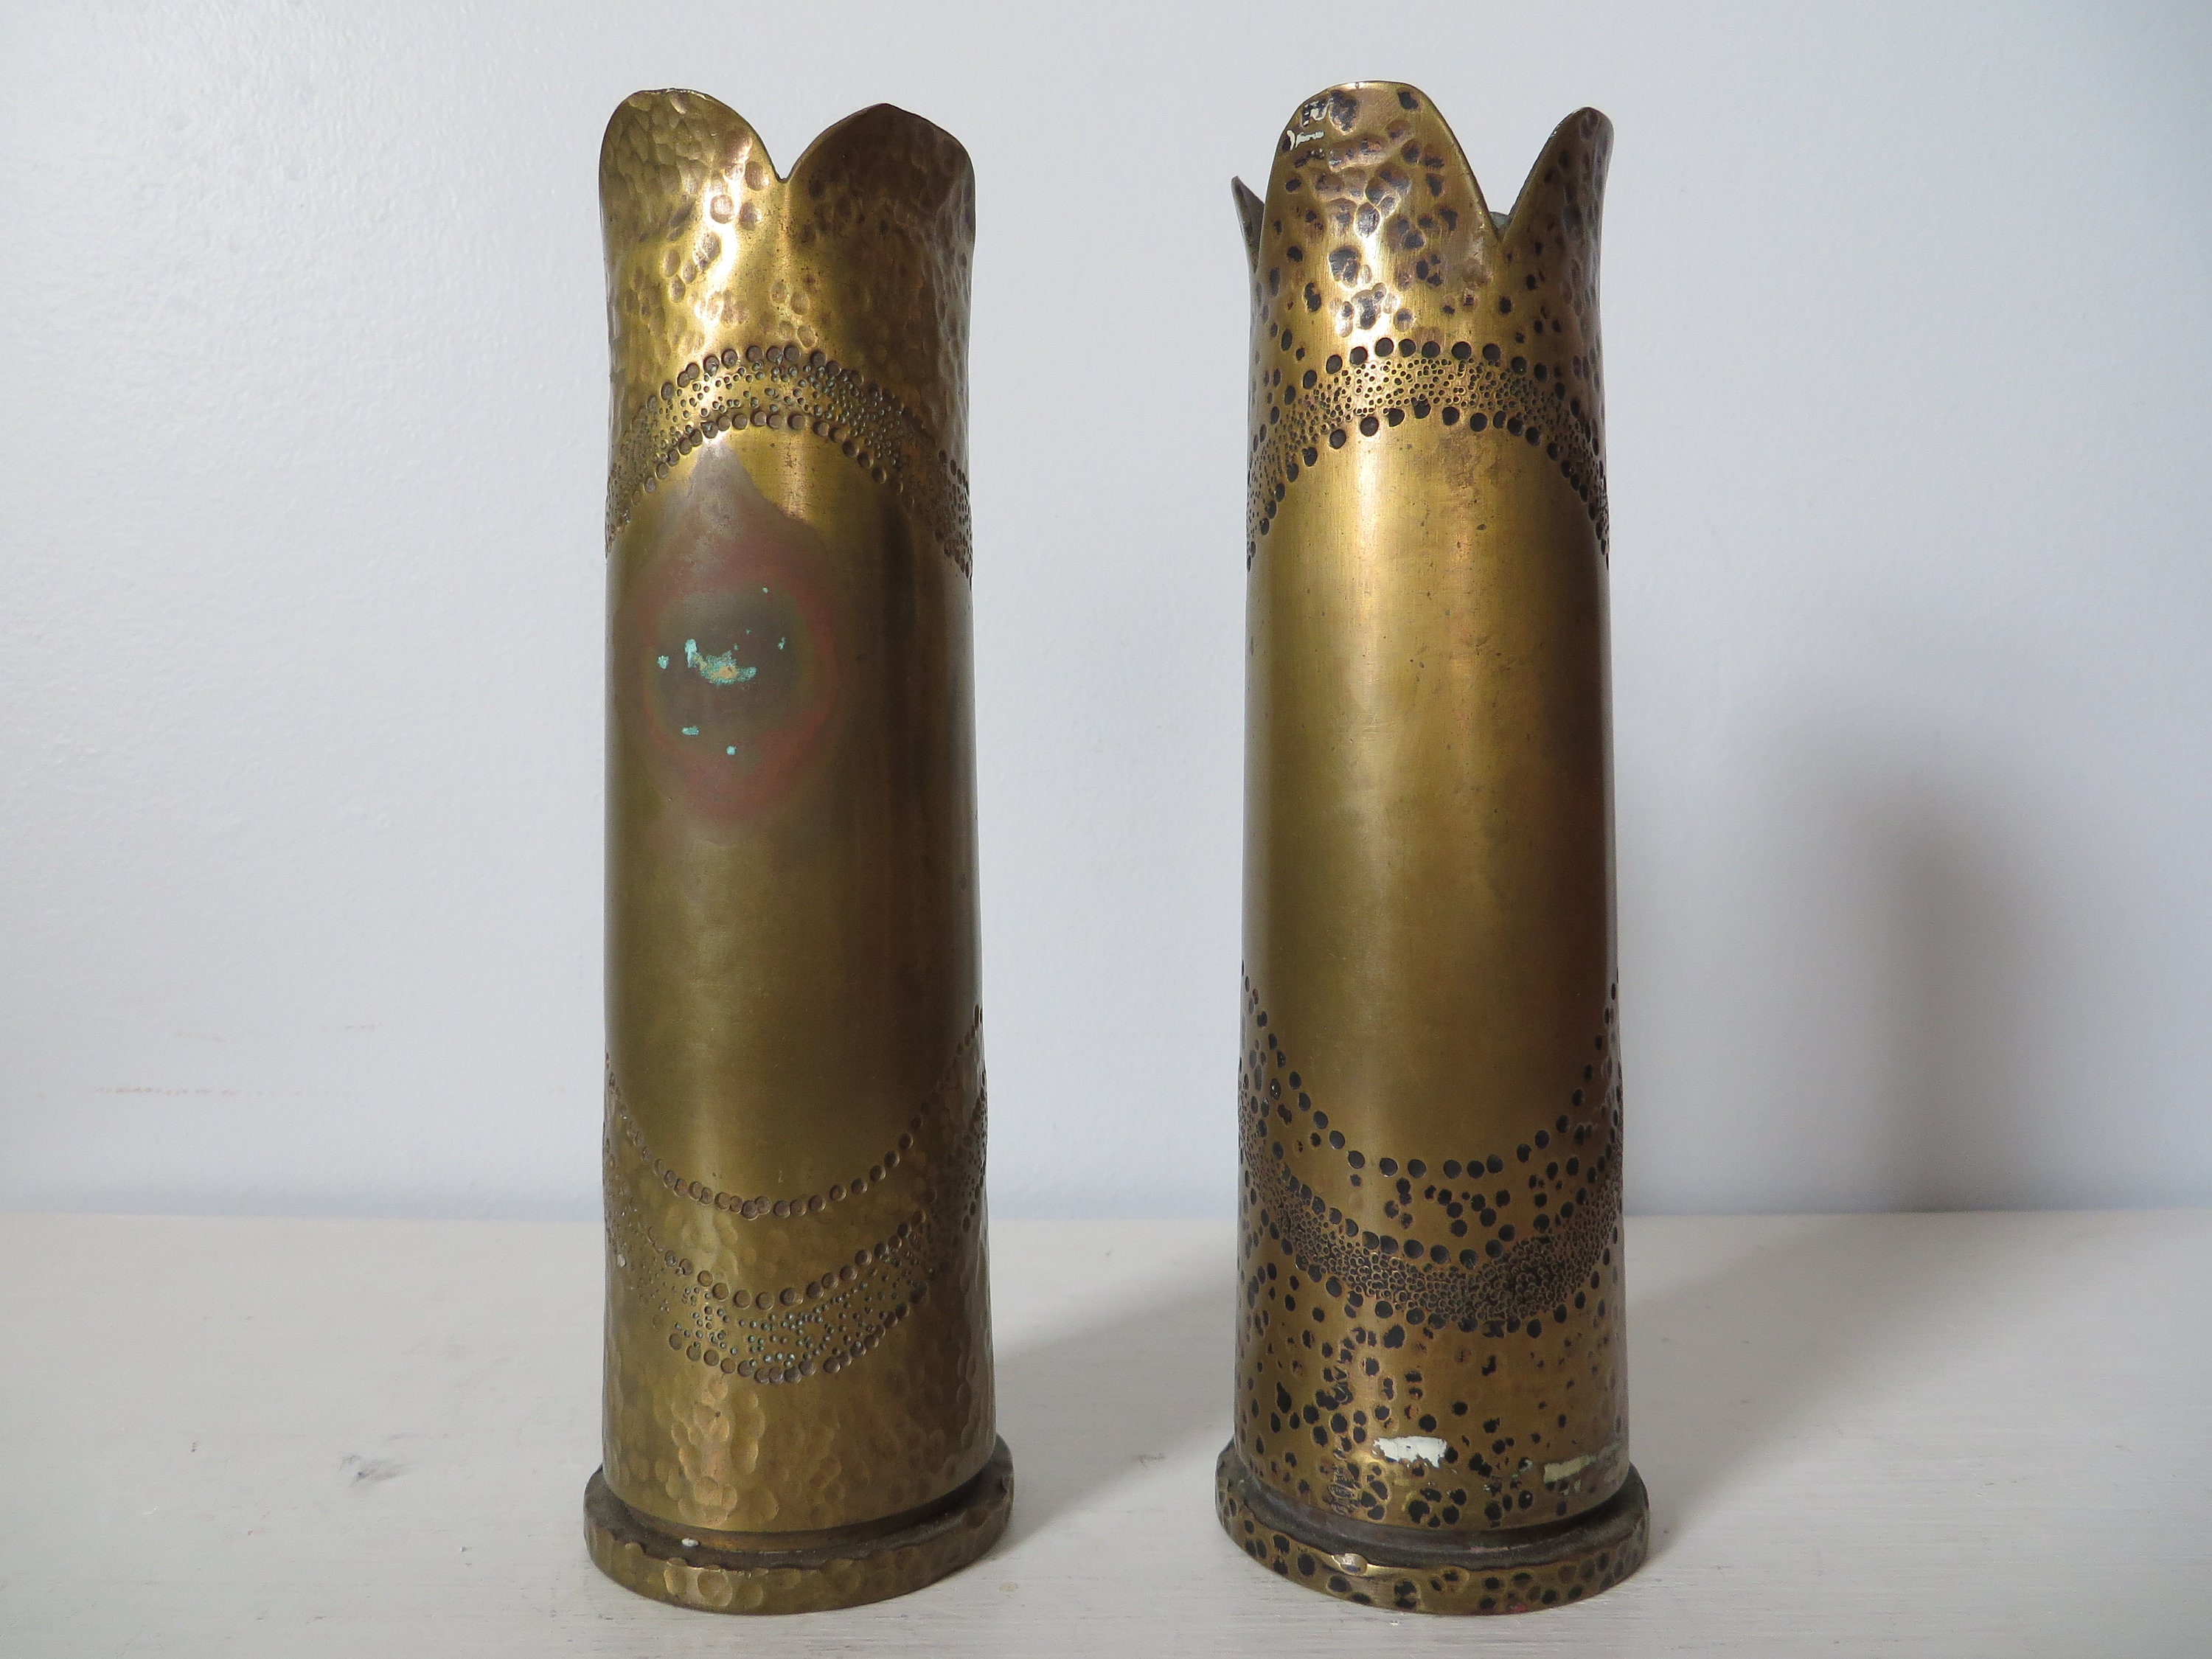 Vintage Trench Art Artillery Shell Vases World War Two 